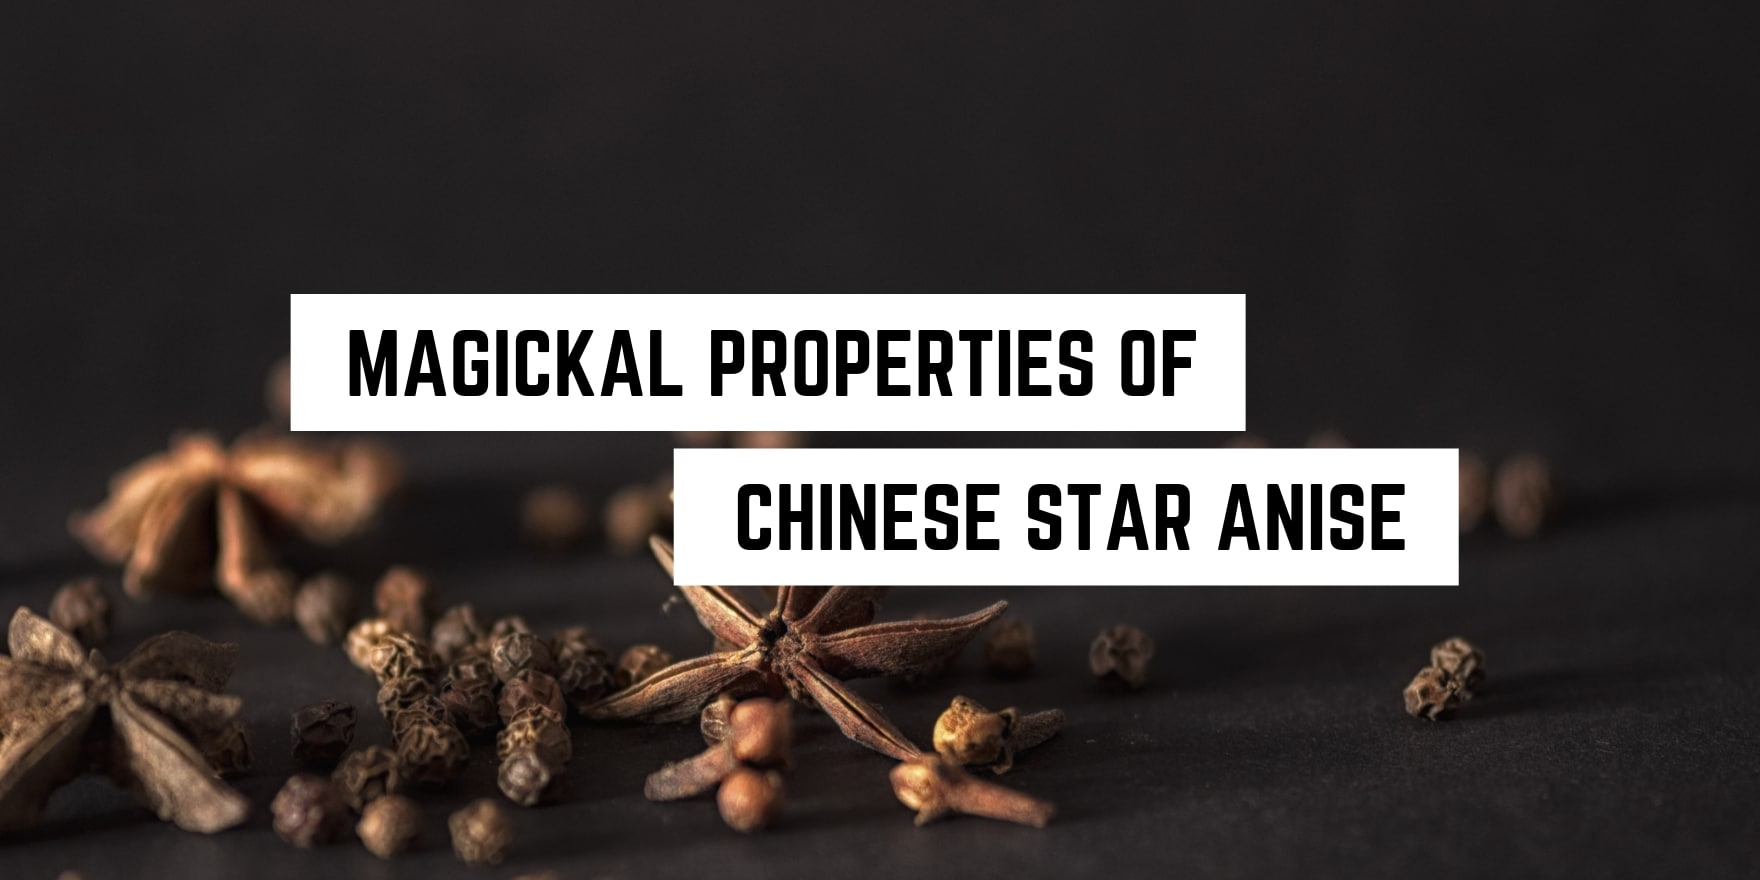 Close-up of Chinese star anise on a dark background with text overlay "Metaphysical properties of Chinese star anise in occult traditions.